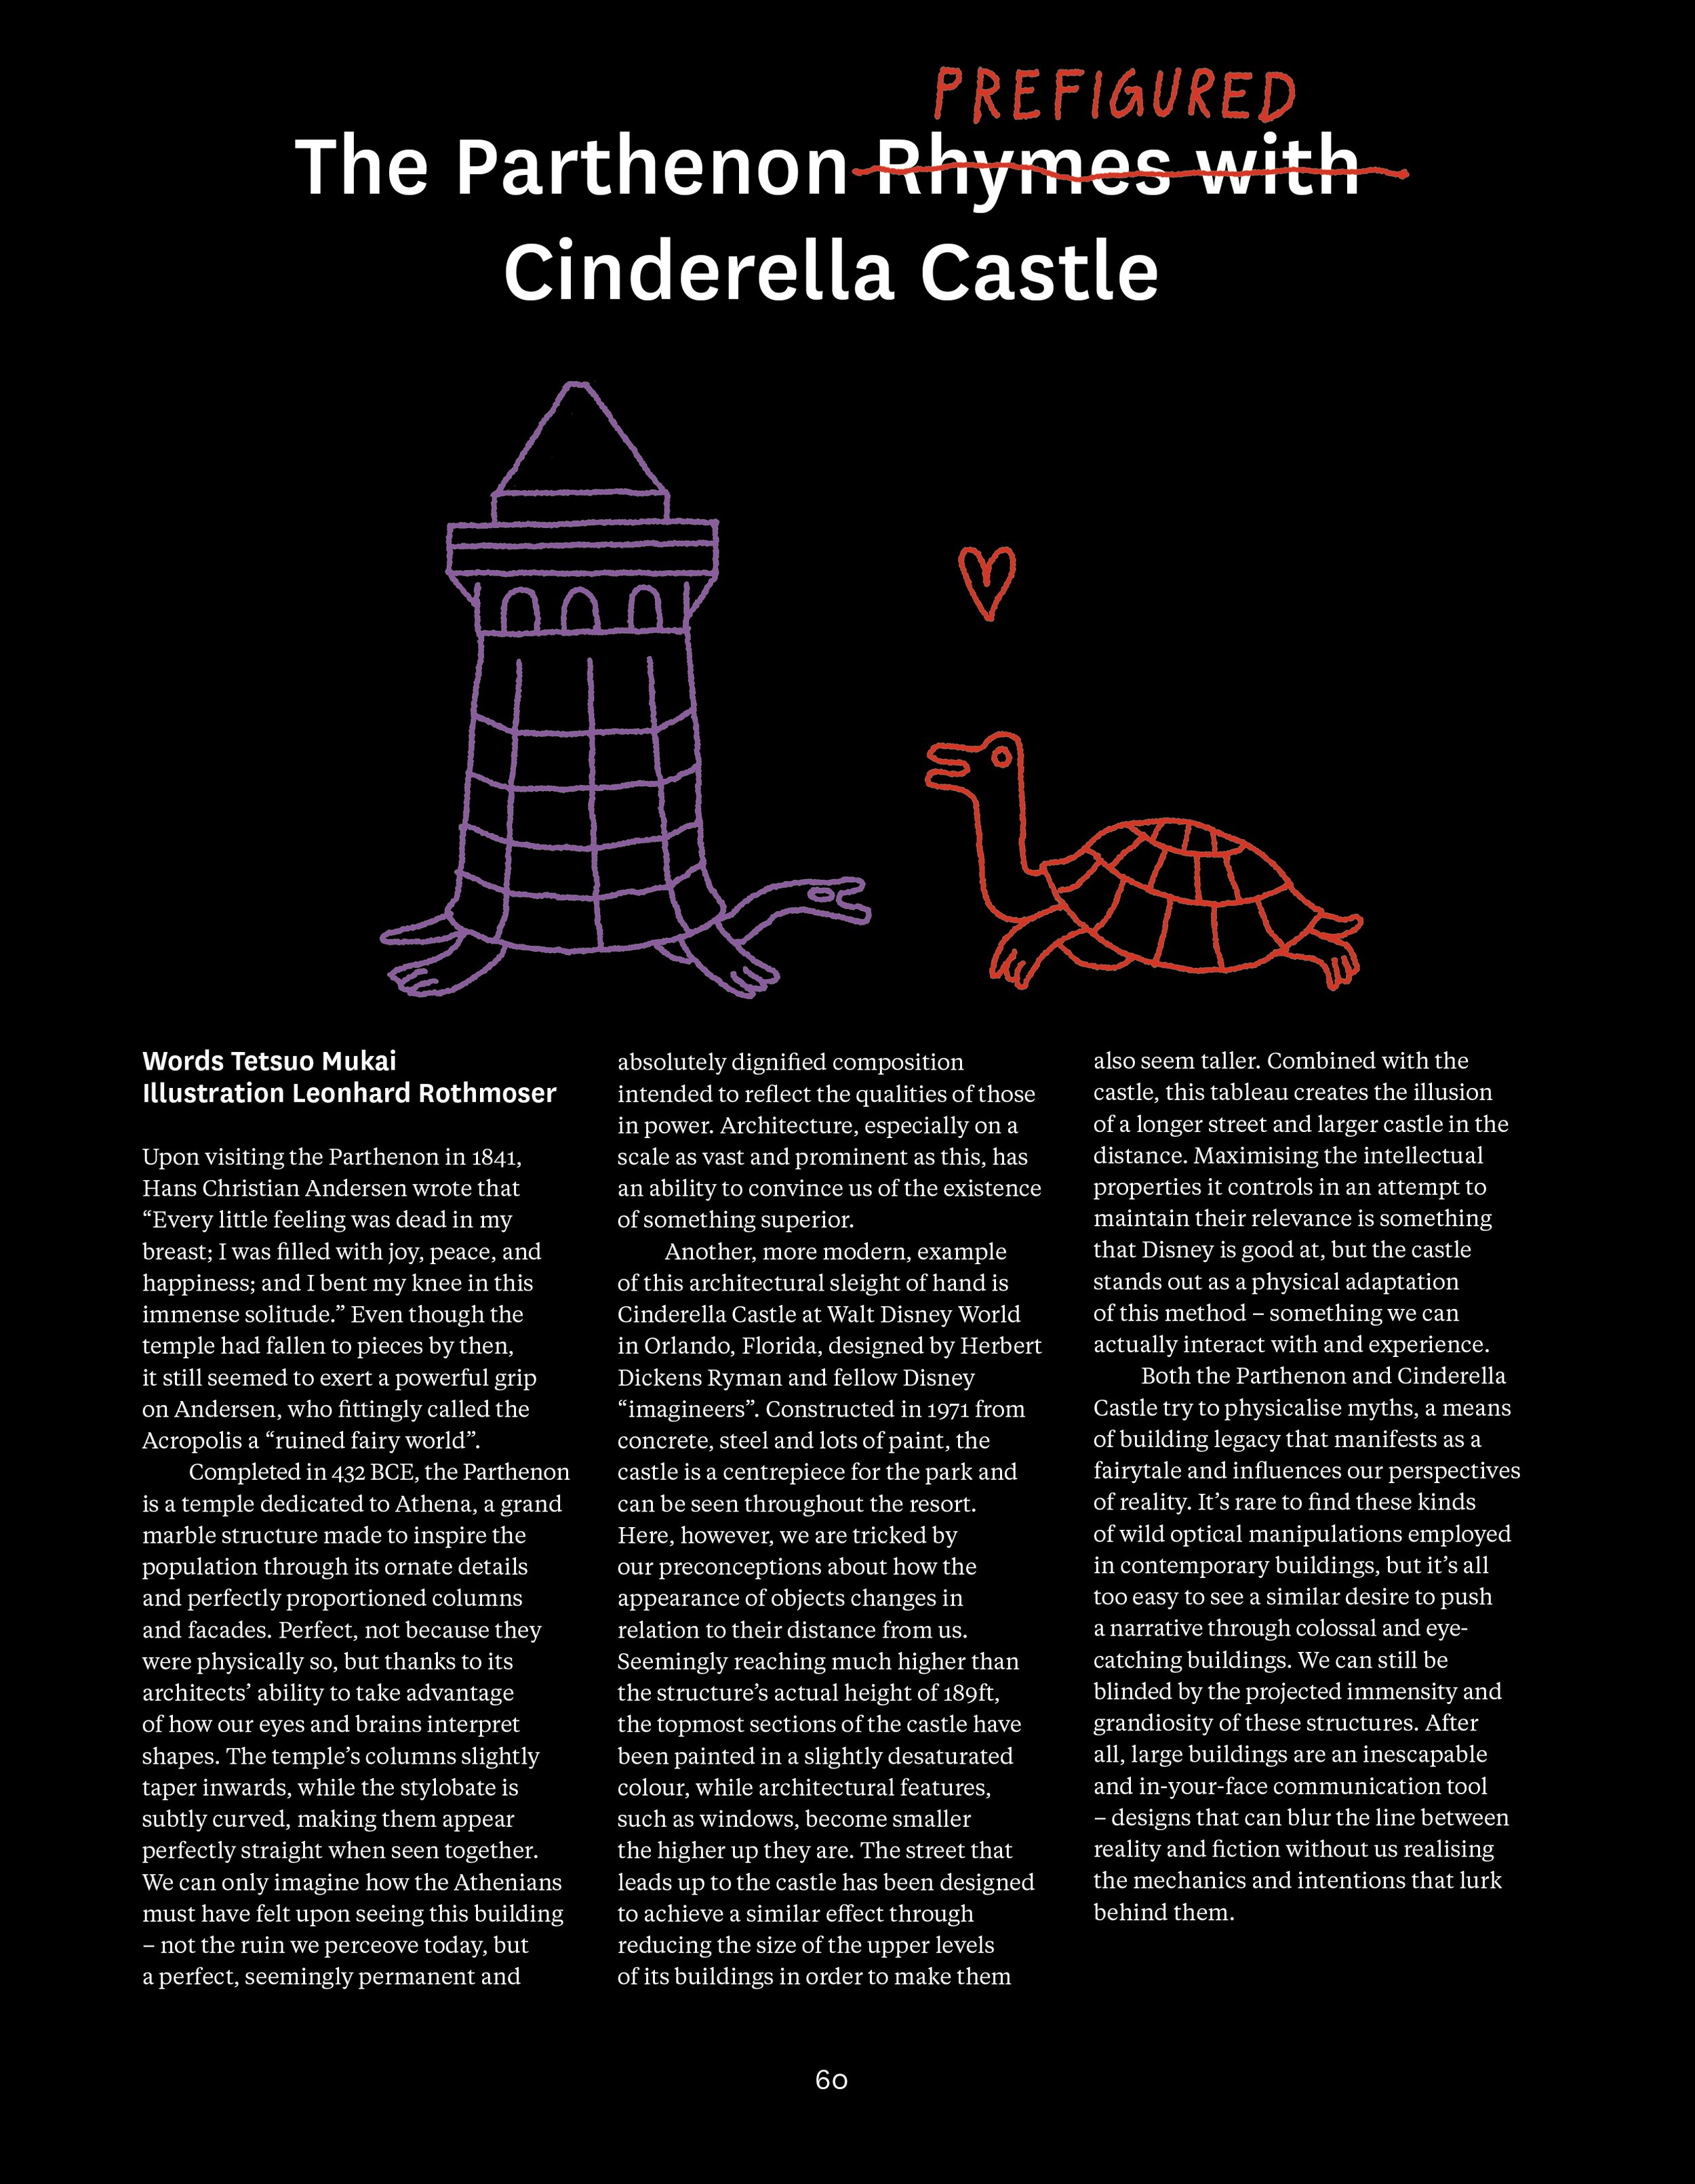 'The Parthenon Rhymes with Cinderella Castle'